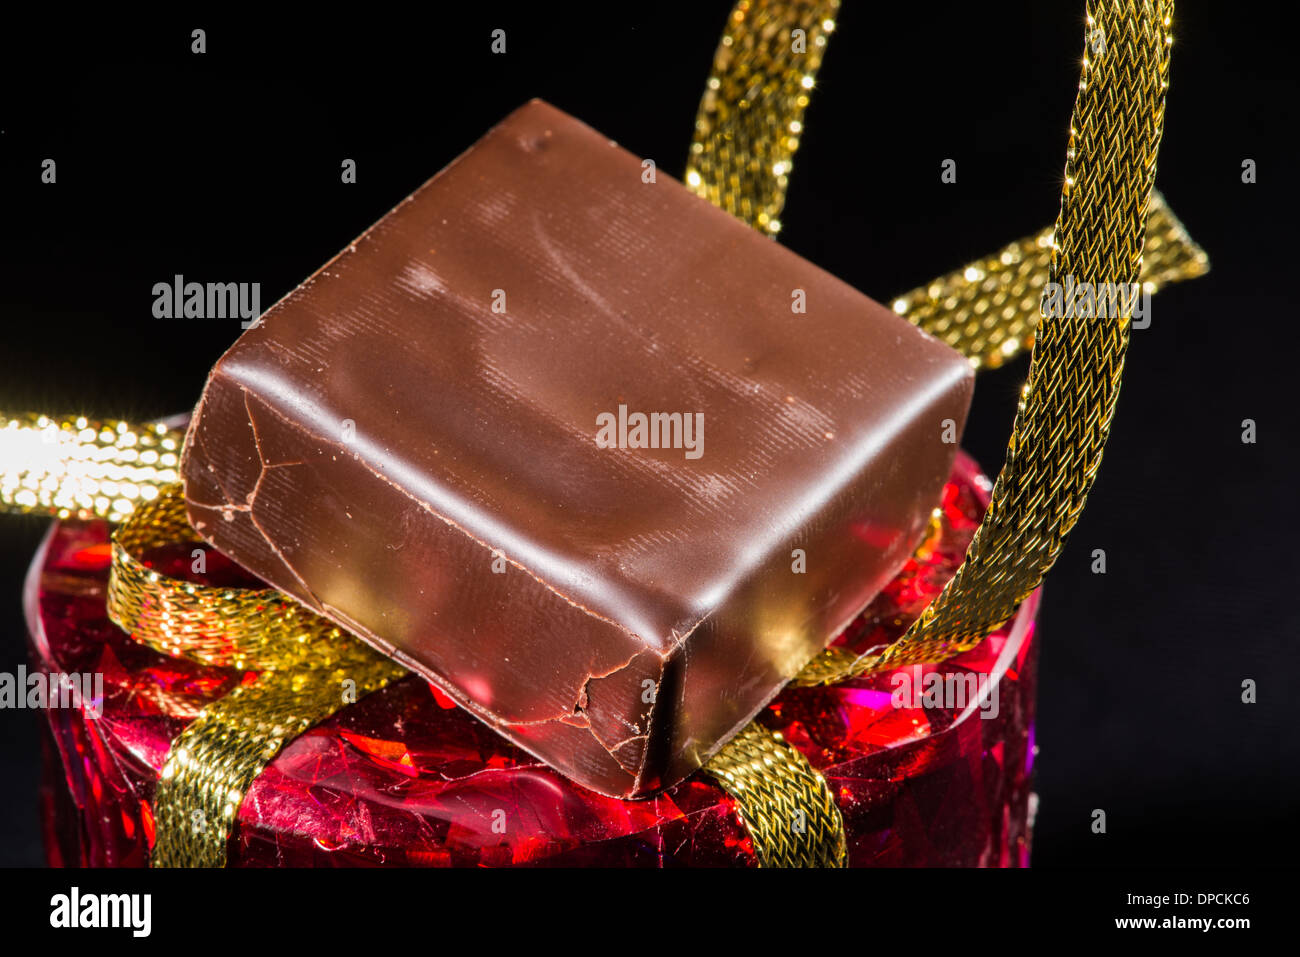 Chocolate bonbon and gold color shiny package Stock Photo